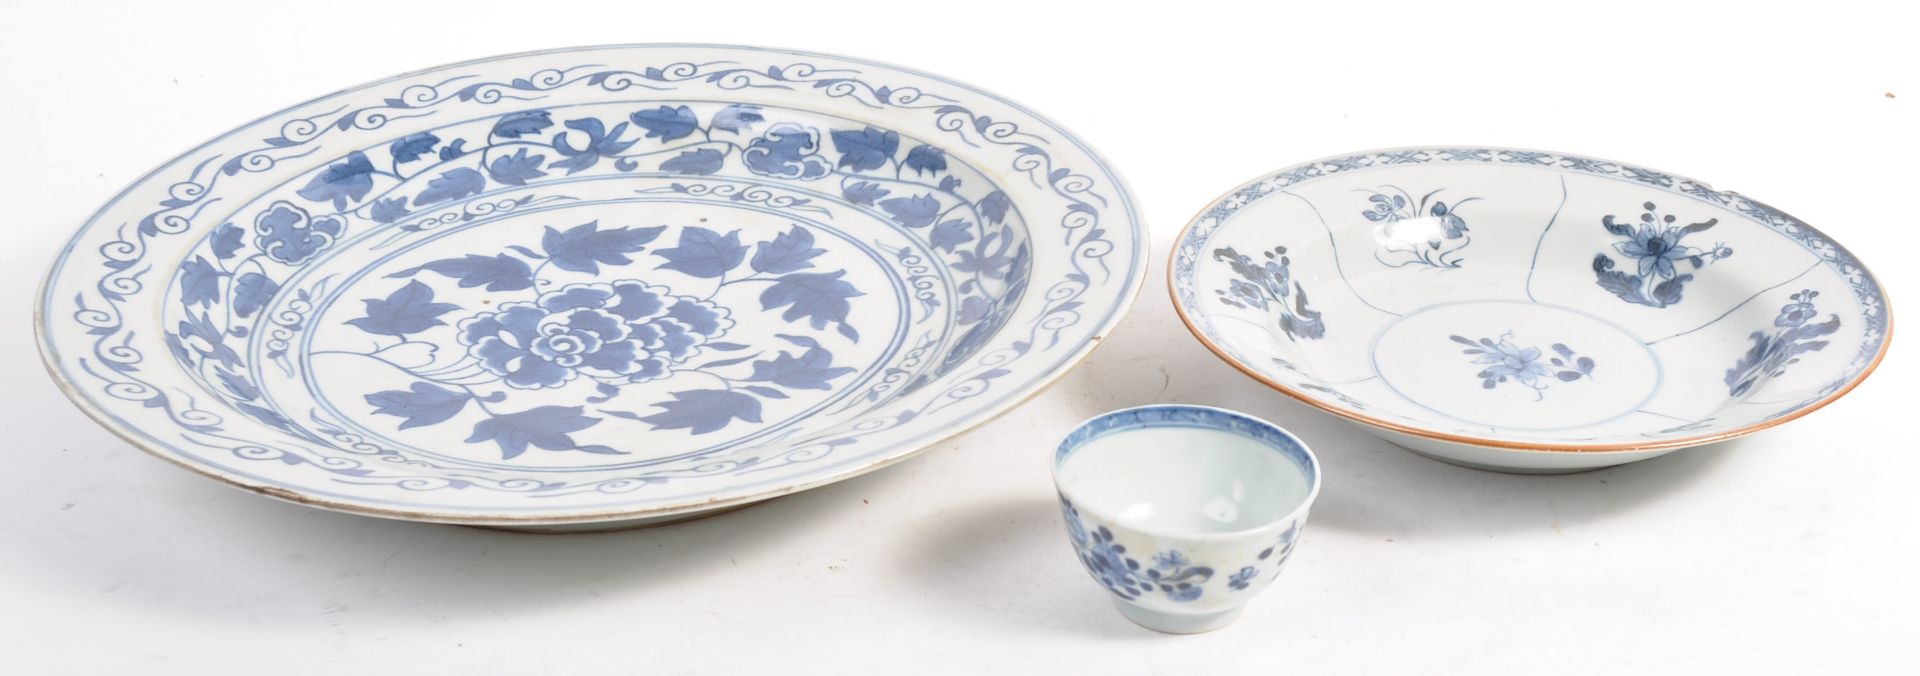 COLLECTION OF 18TH CENTURY CHINESE BLUE AND WHITE PORCELAIN